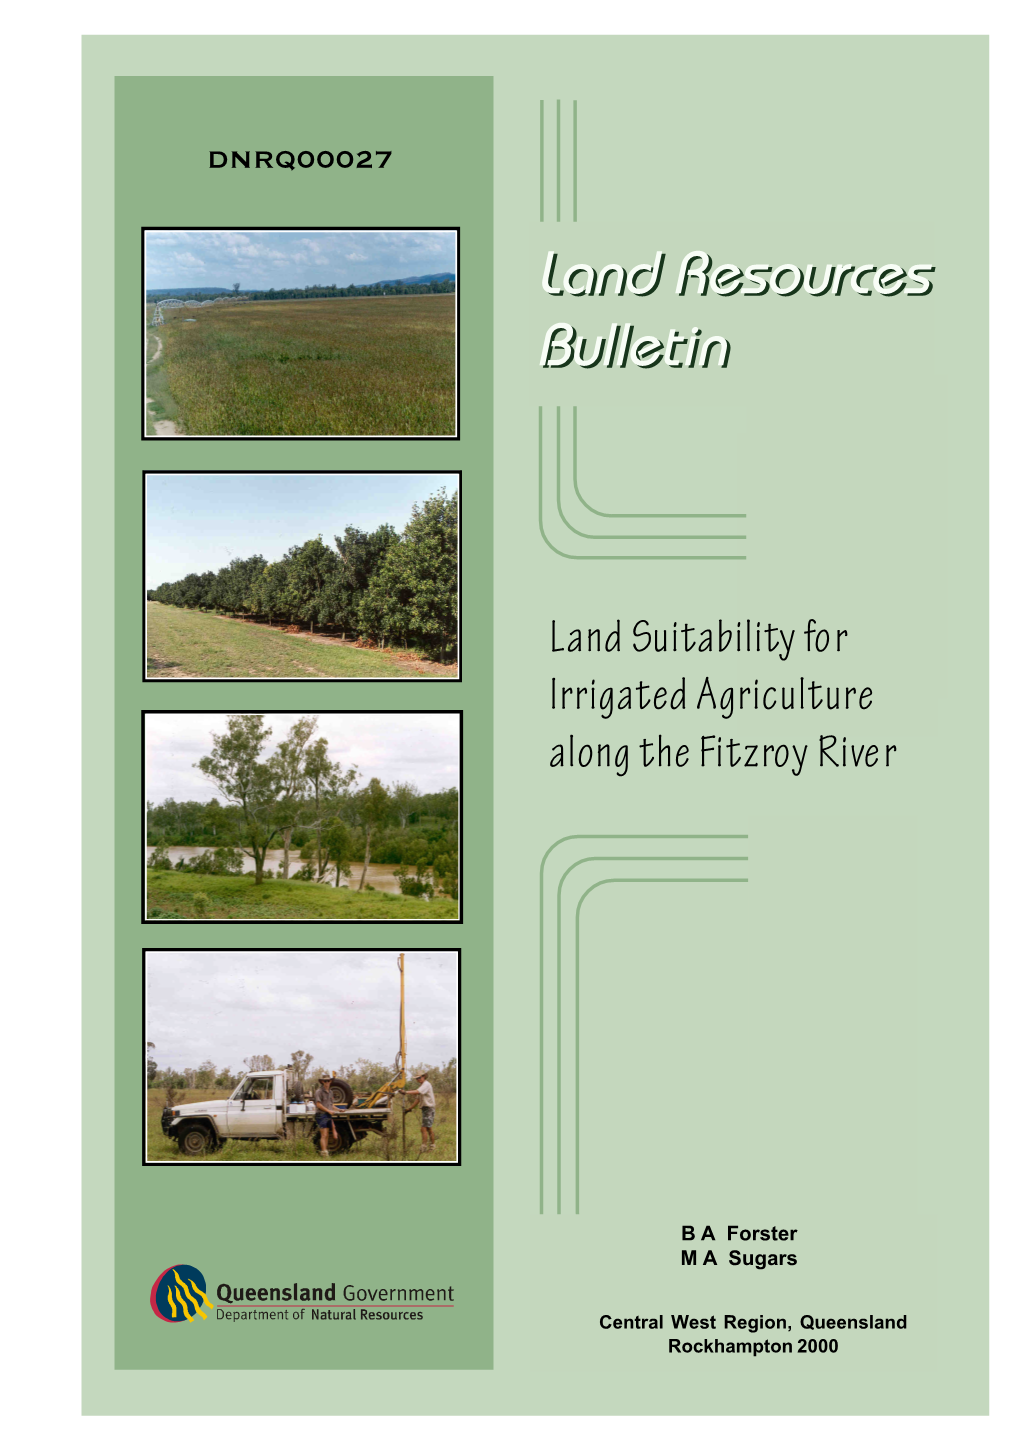 Land Suitability for Irrigated Agriculture Along the Fitzroy River